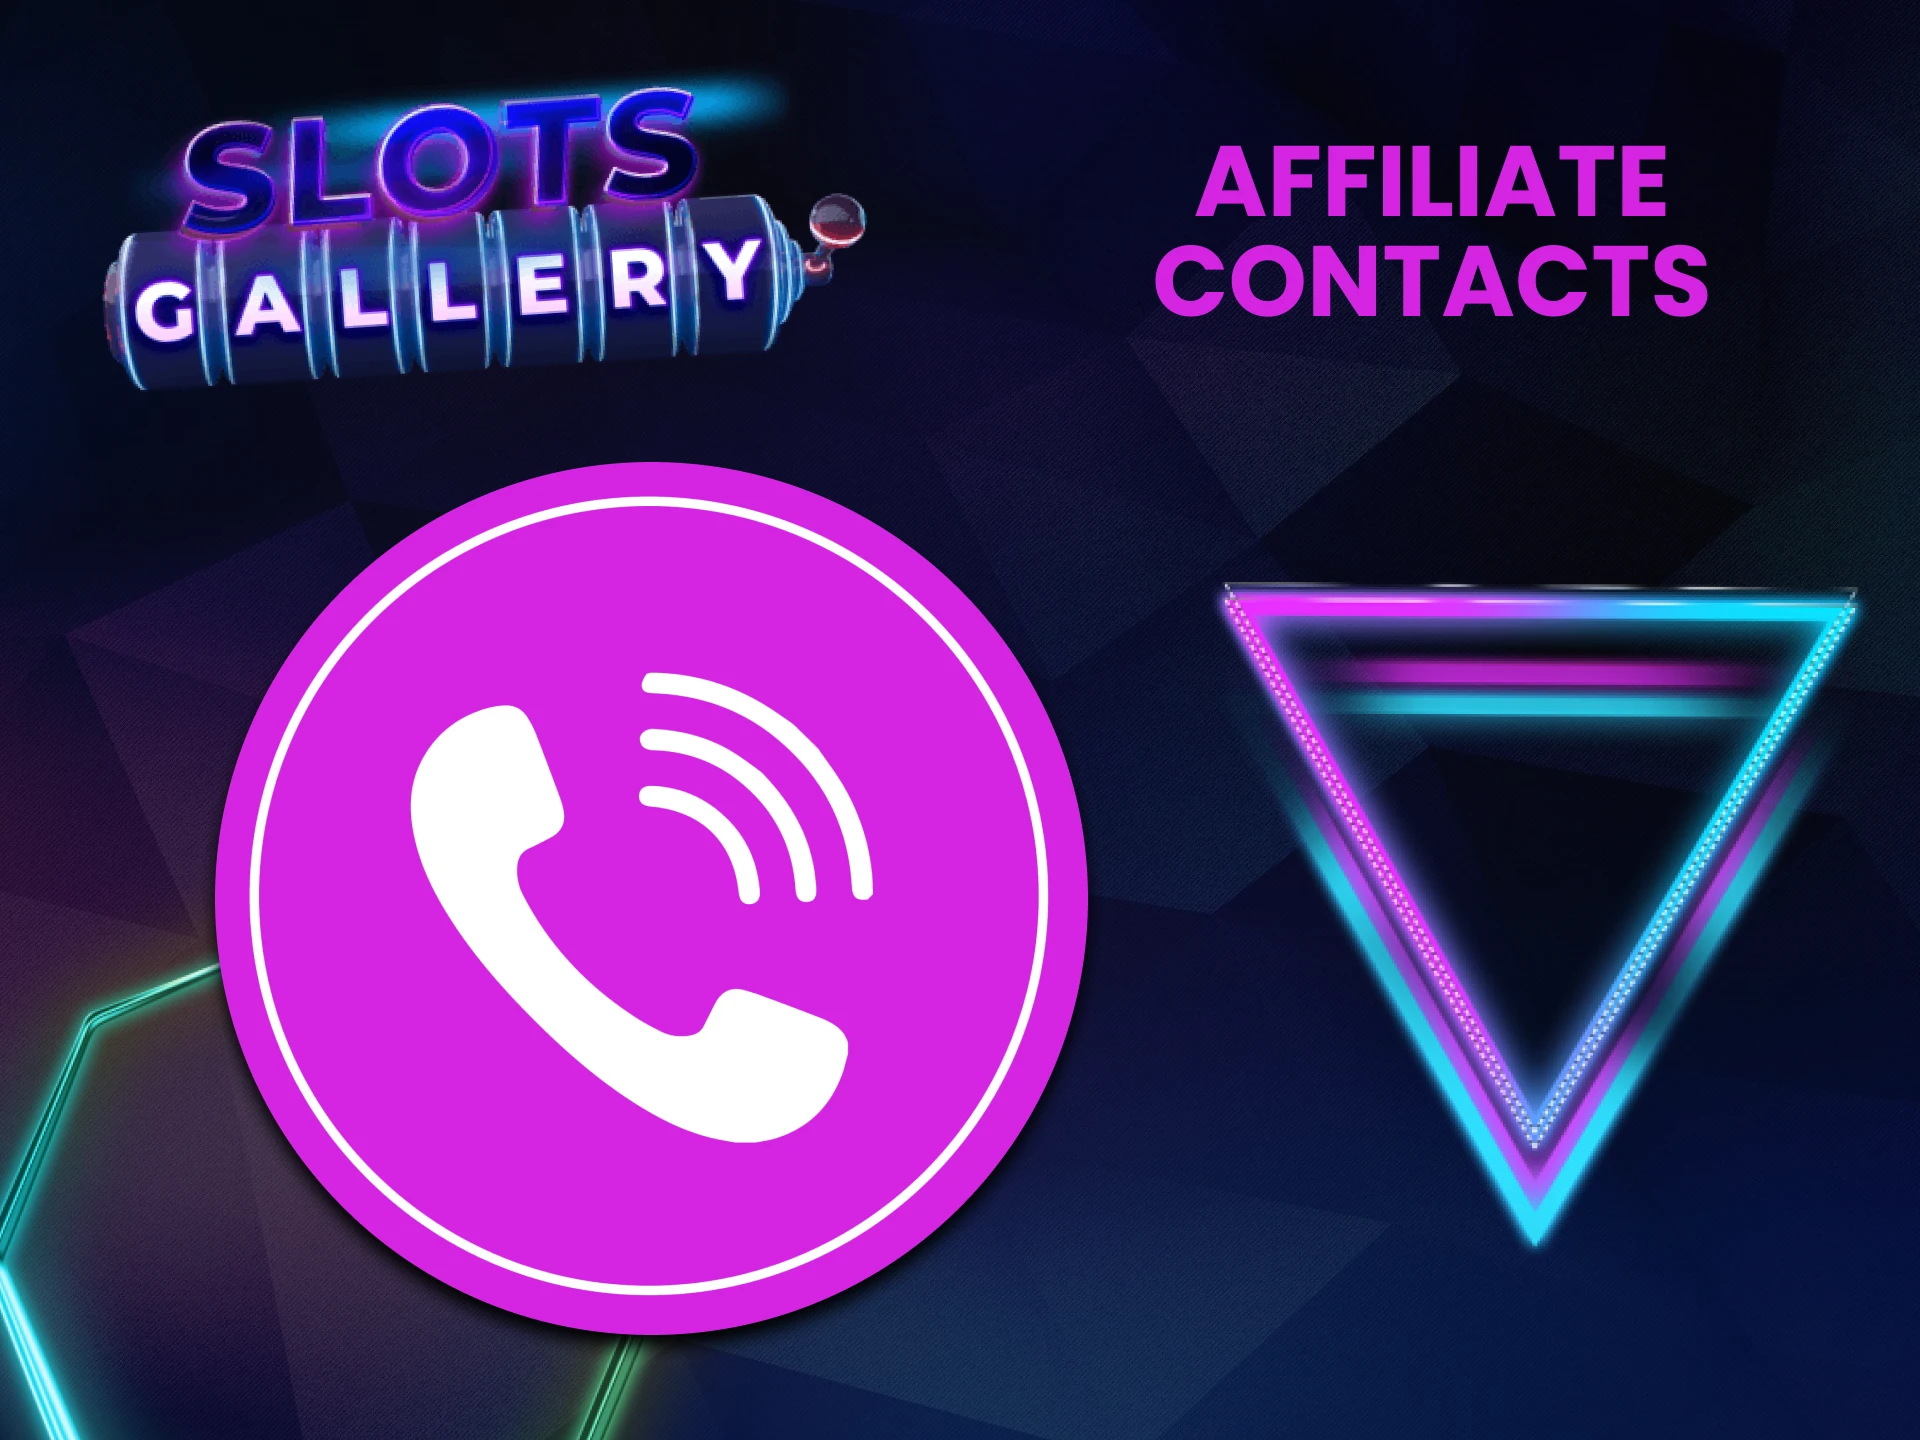 We will show you how to contact the Slots Gallery affiliate program team.